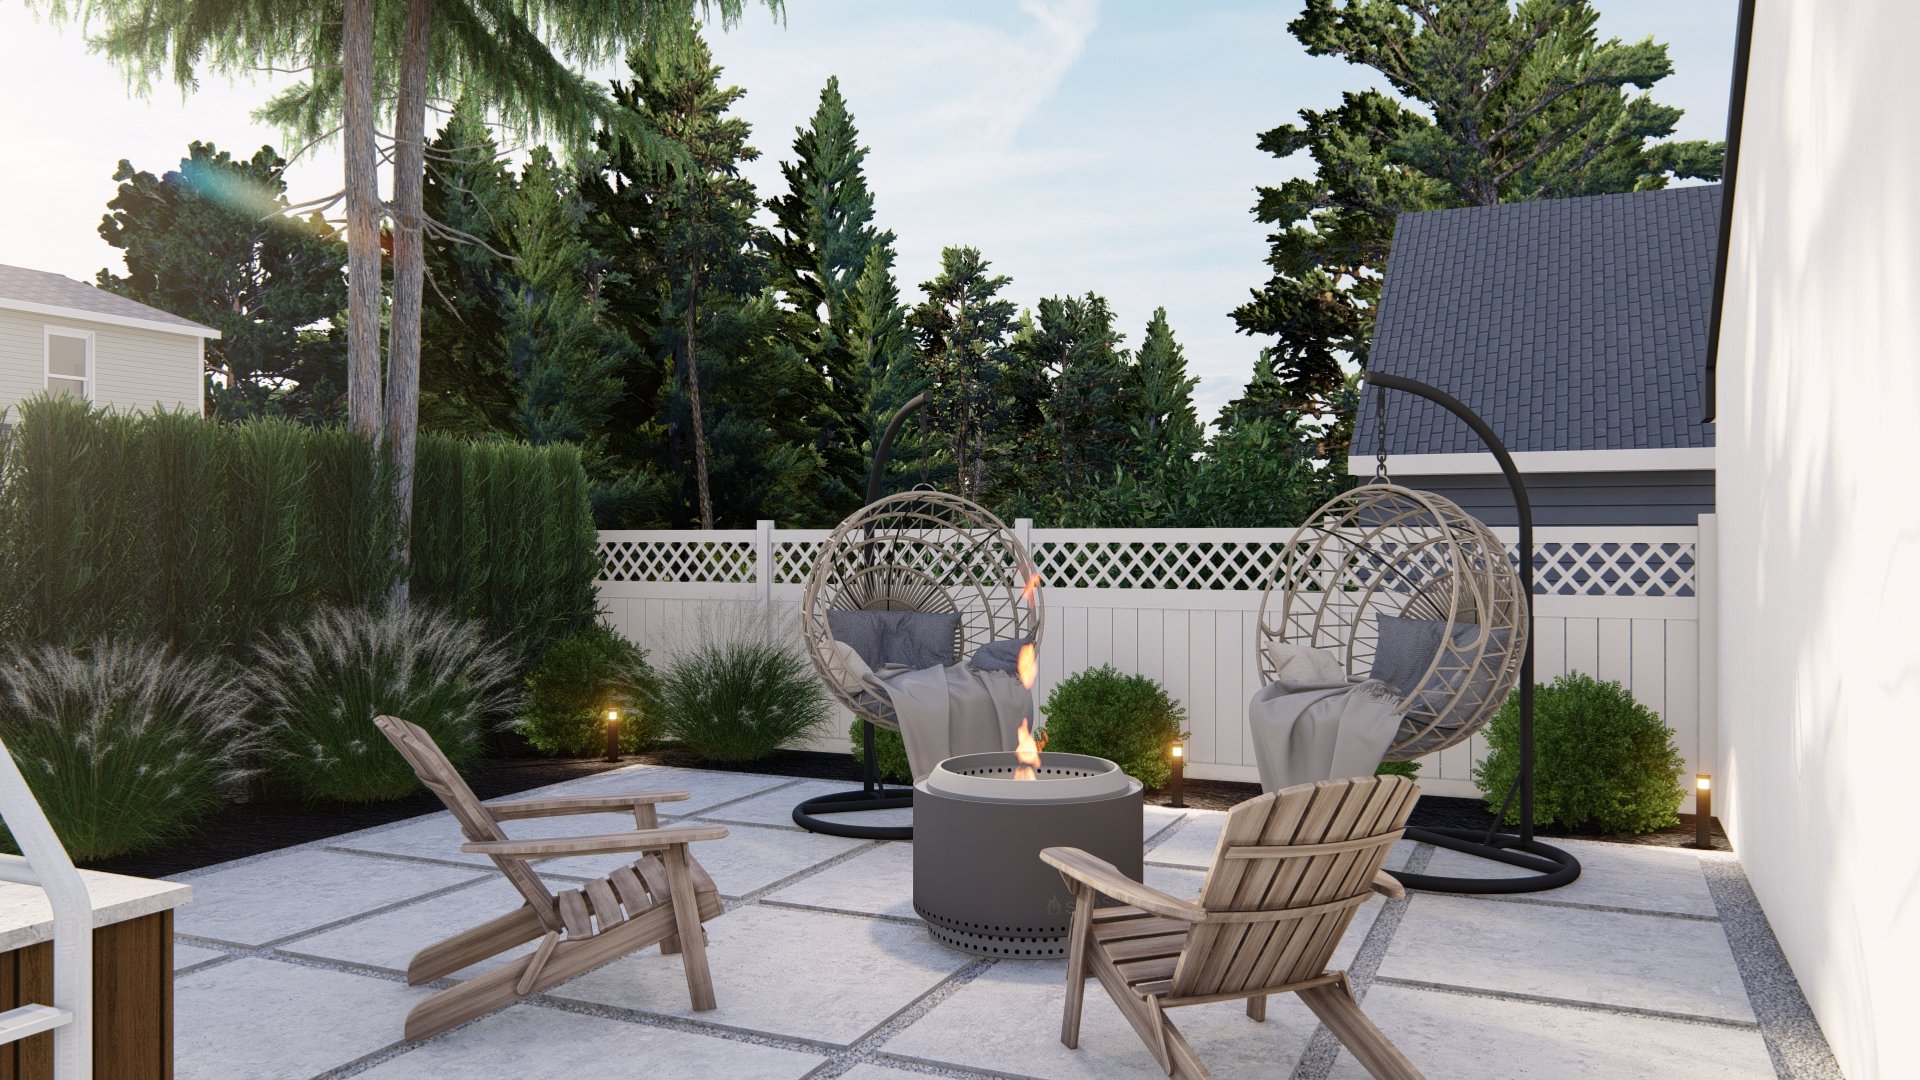 Concrete floor yard, harrier hanging chairs, adirondack chairs, fire pit, and ornamental plants.